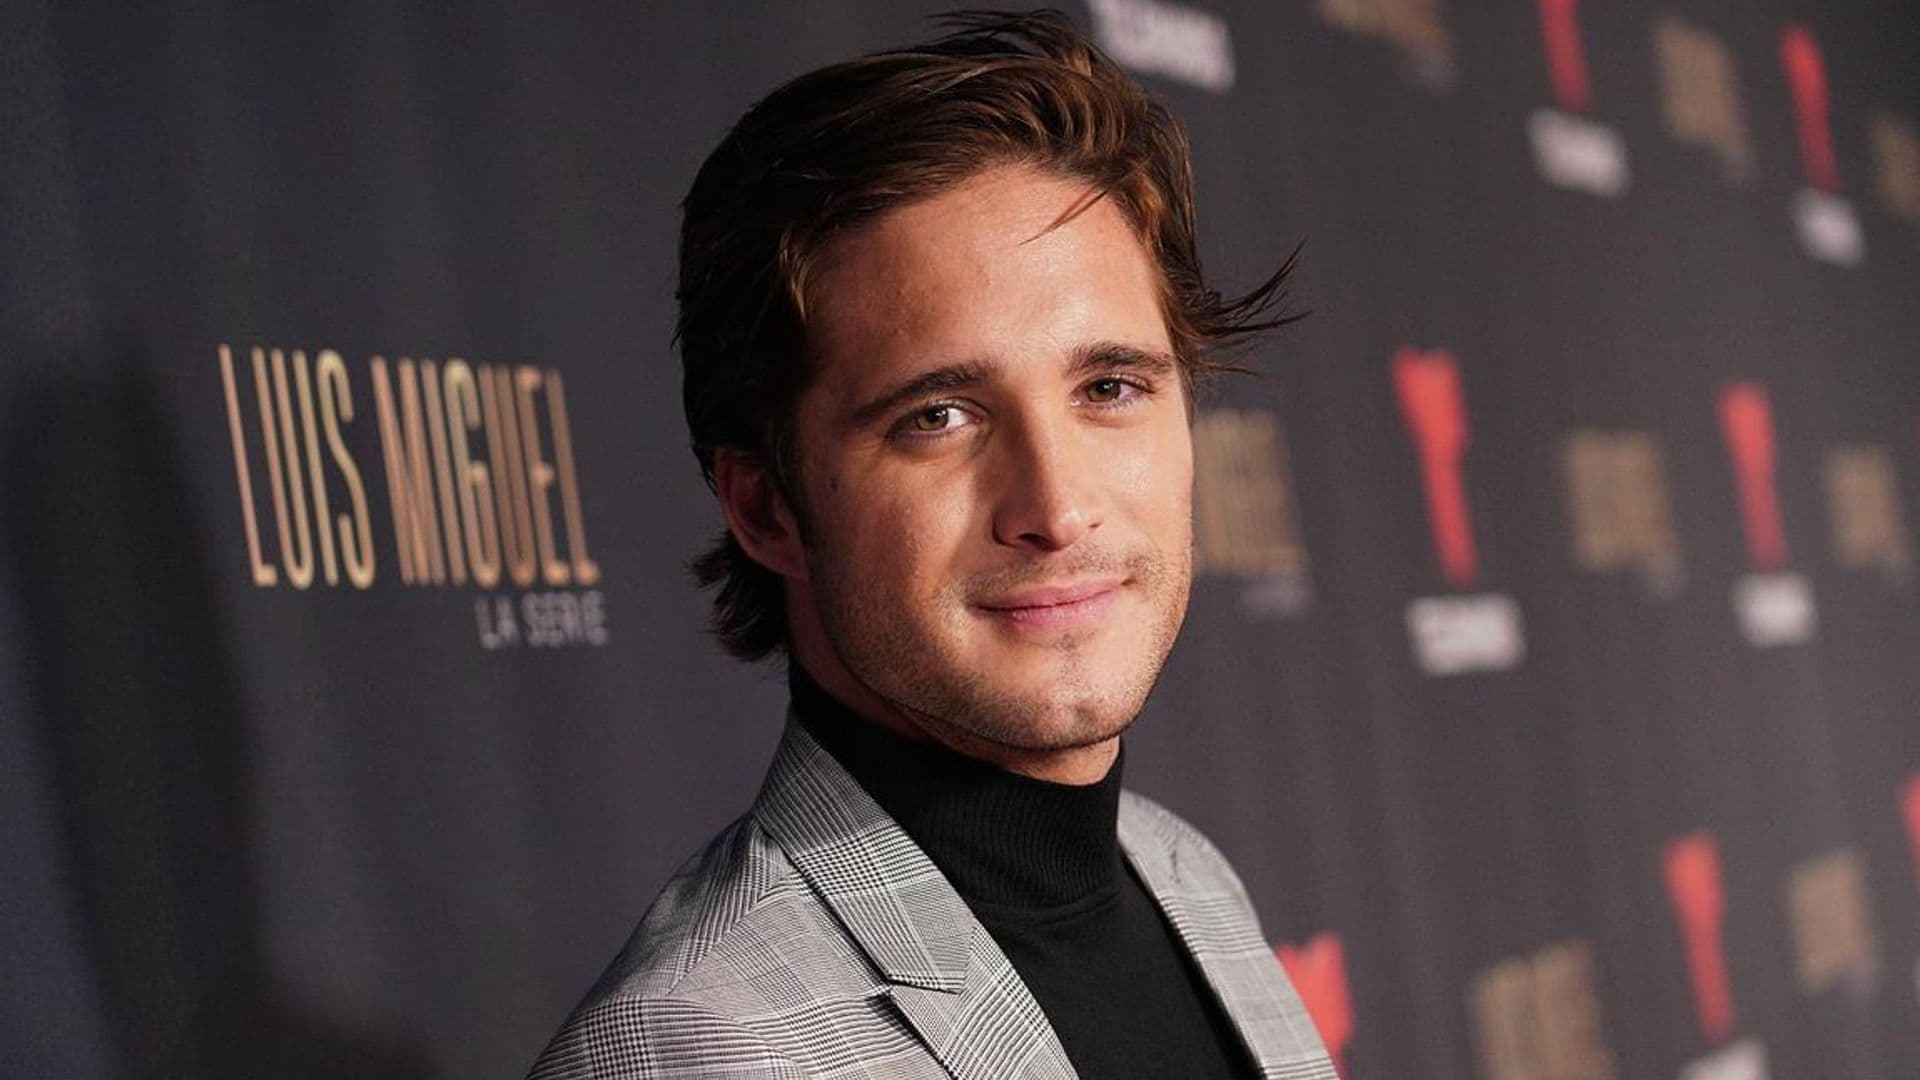 Diego Boneta talks about his transformation for ‘Luis Miguel: The Series’